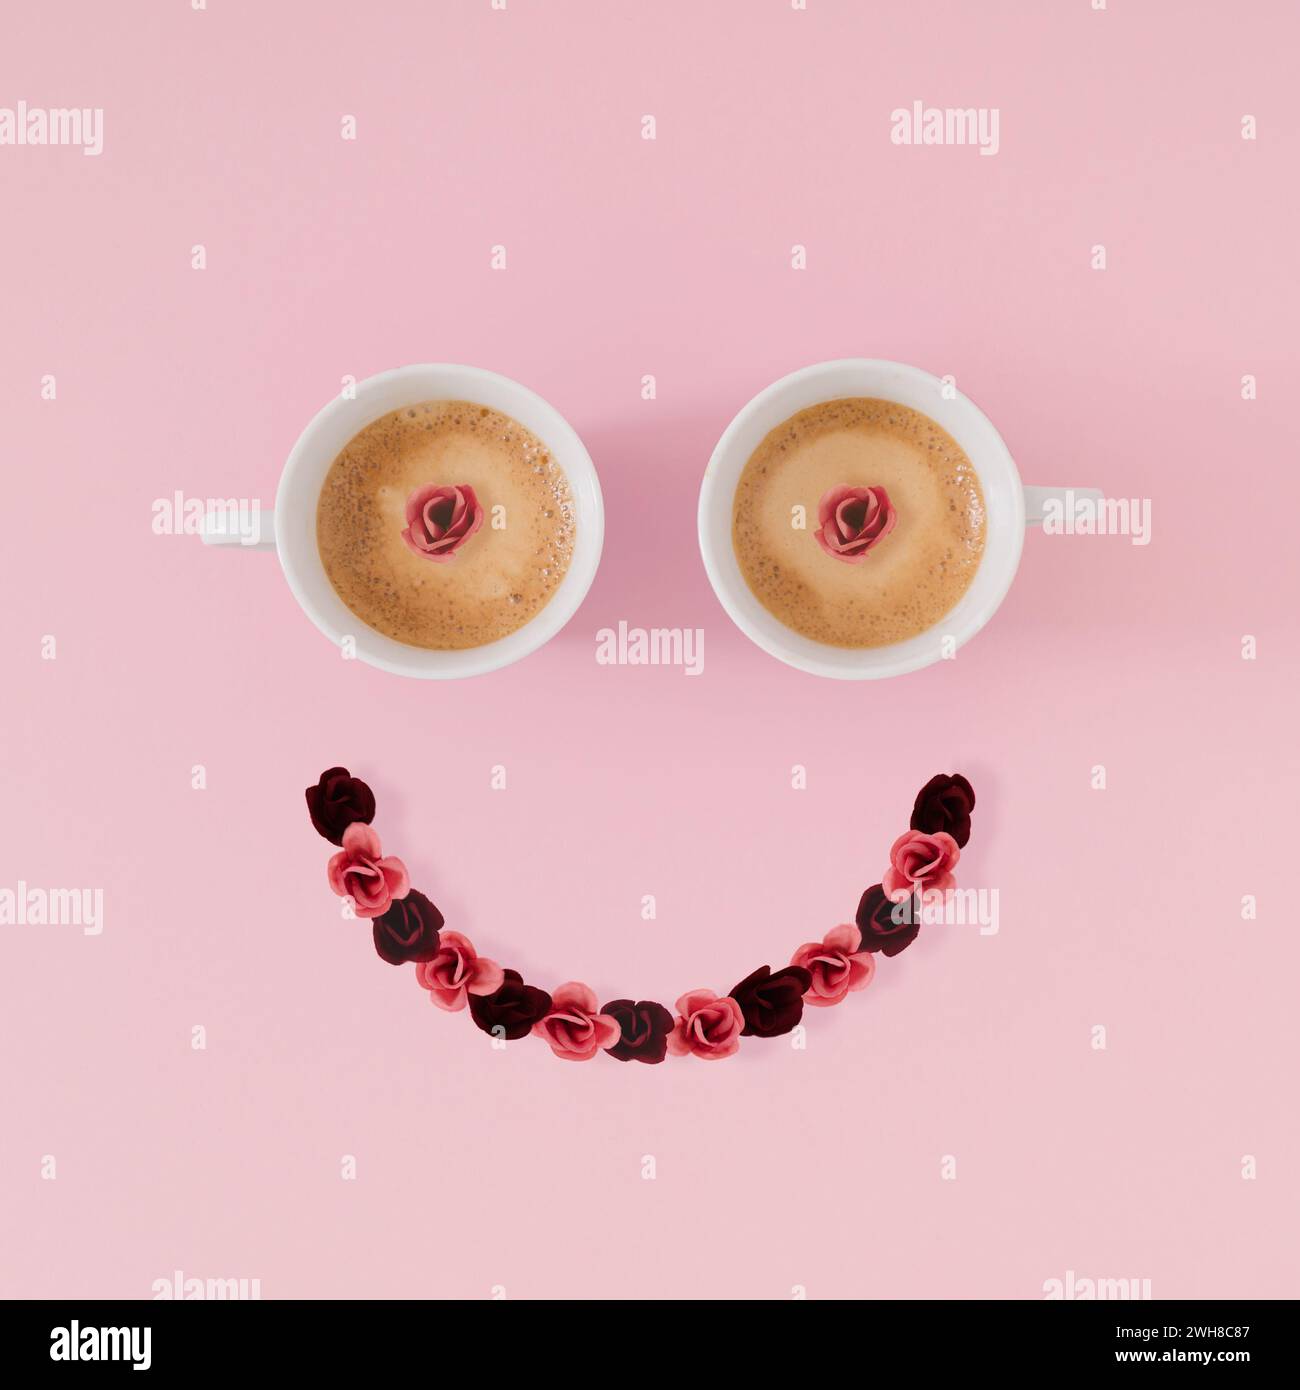 Layout of smiley emoticon made with coffee cups and flowers on pink background. Minimal coffee concept. Creative positive thinking and good mood idea. Stock Photo